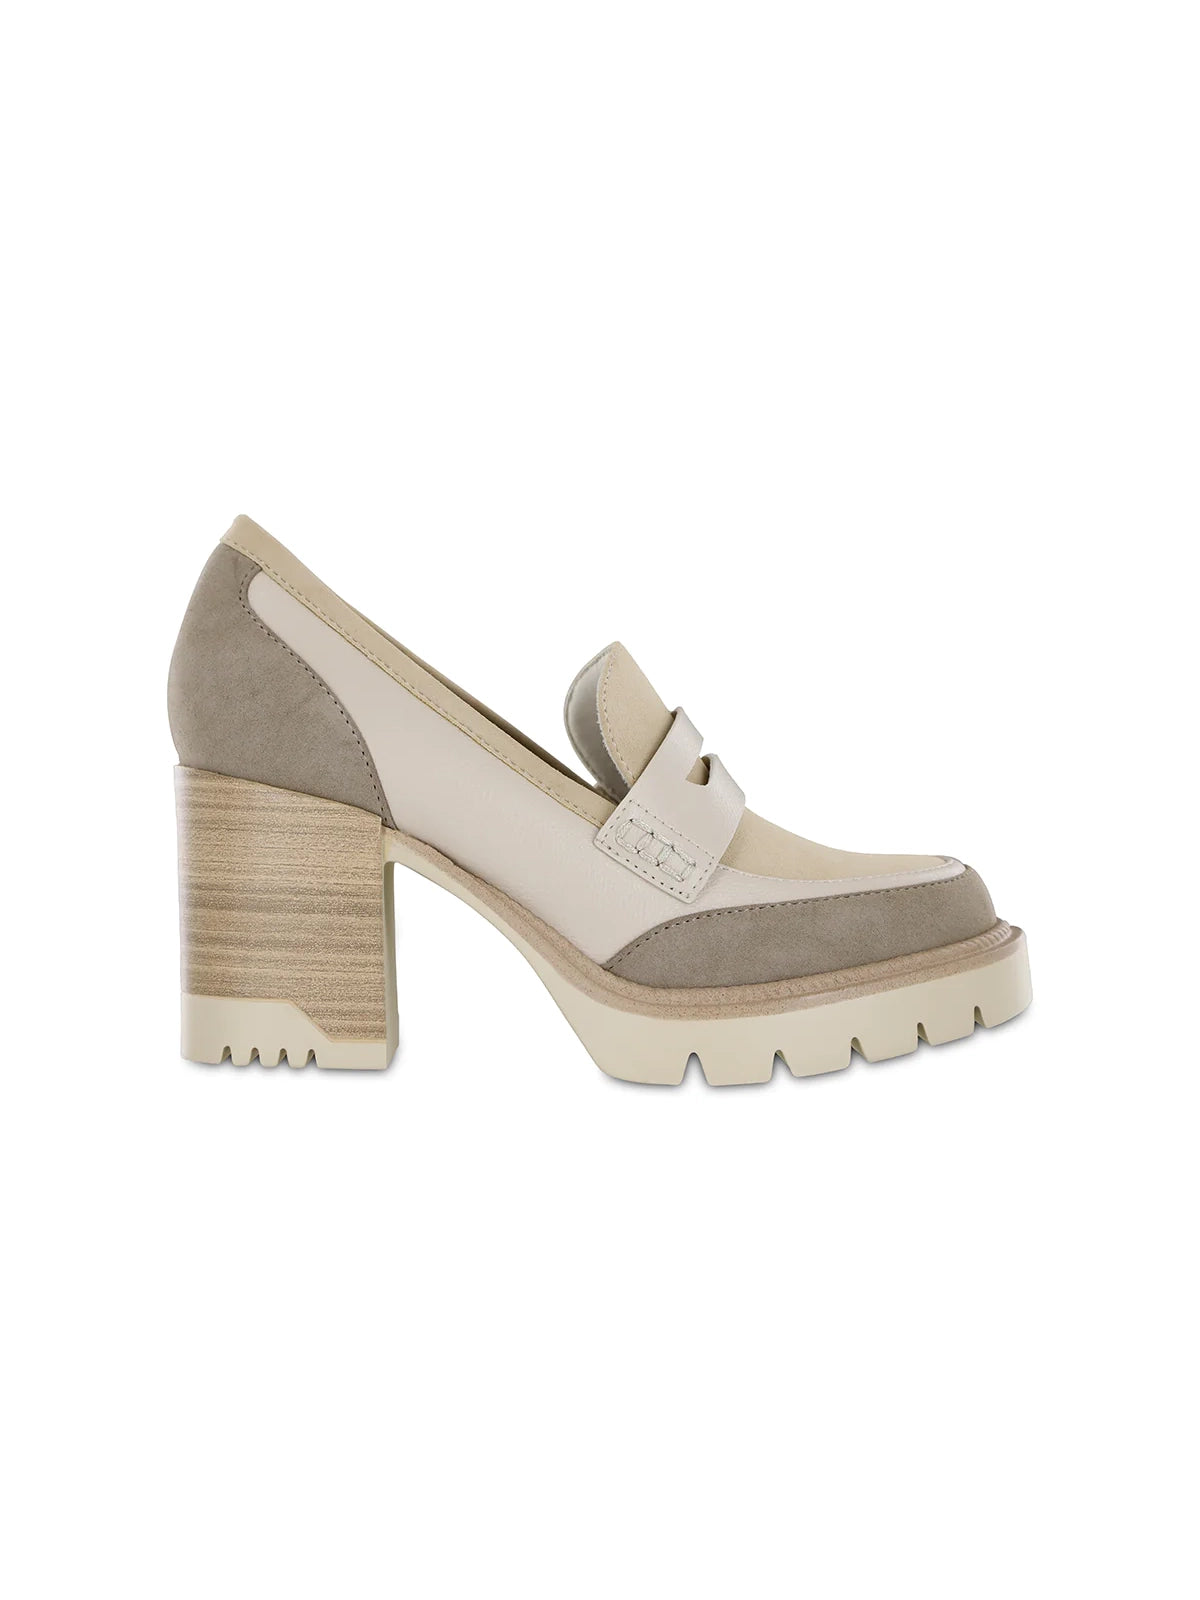 MIA nissa platform penny loafer in sand beige taupe